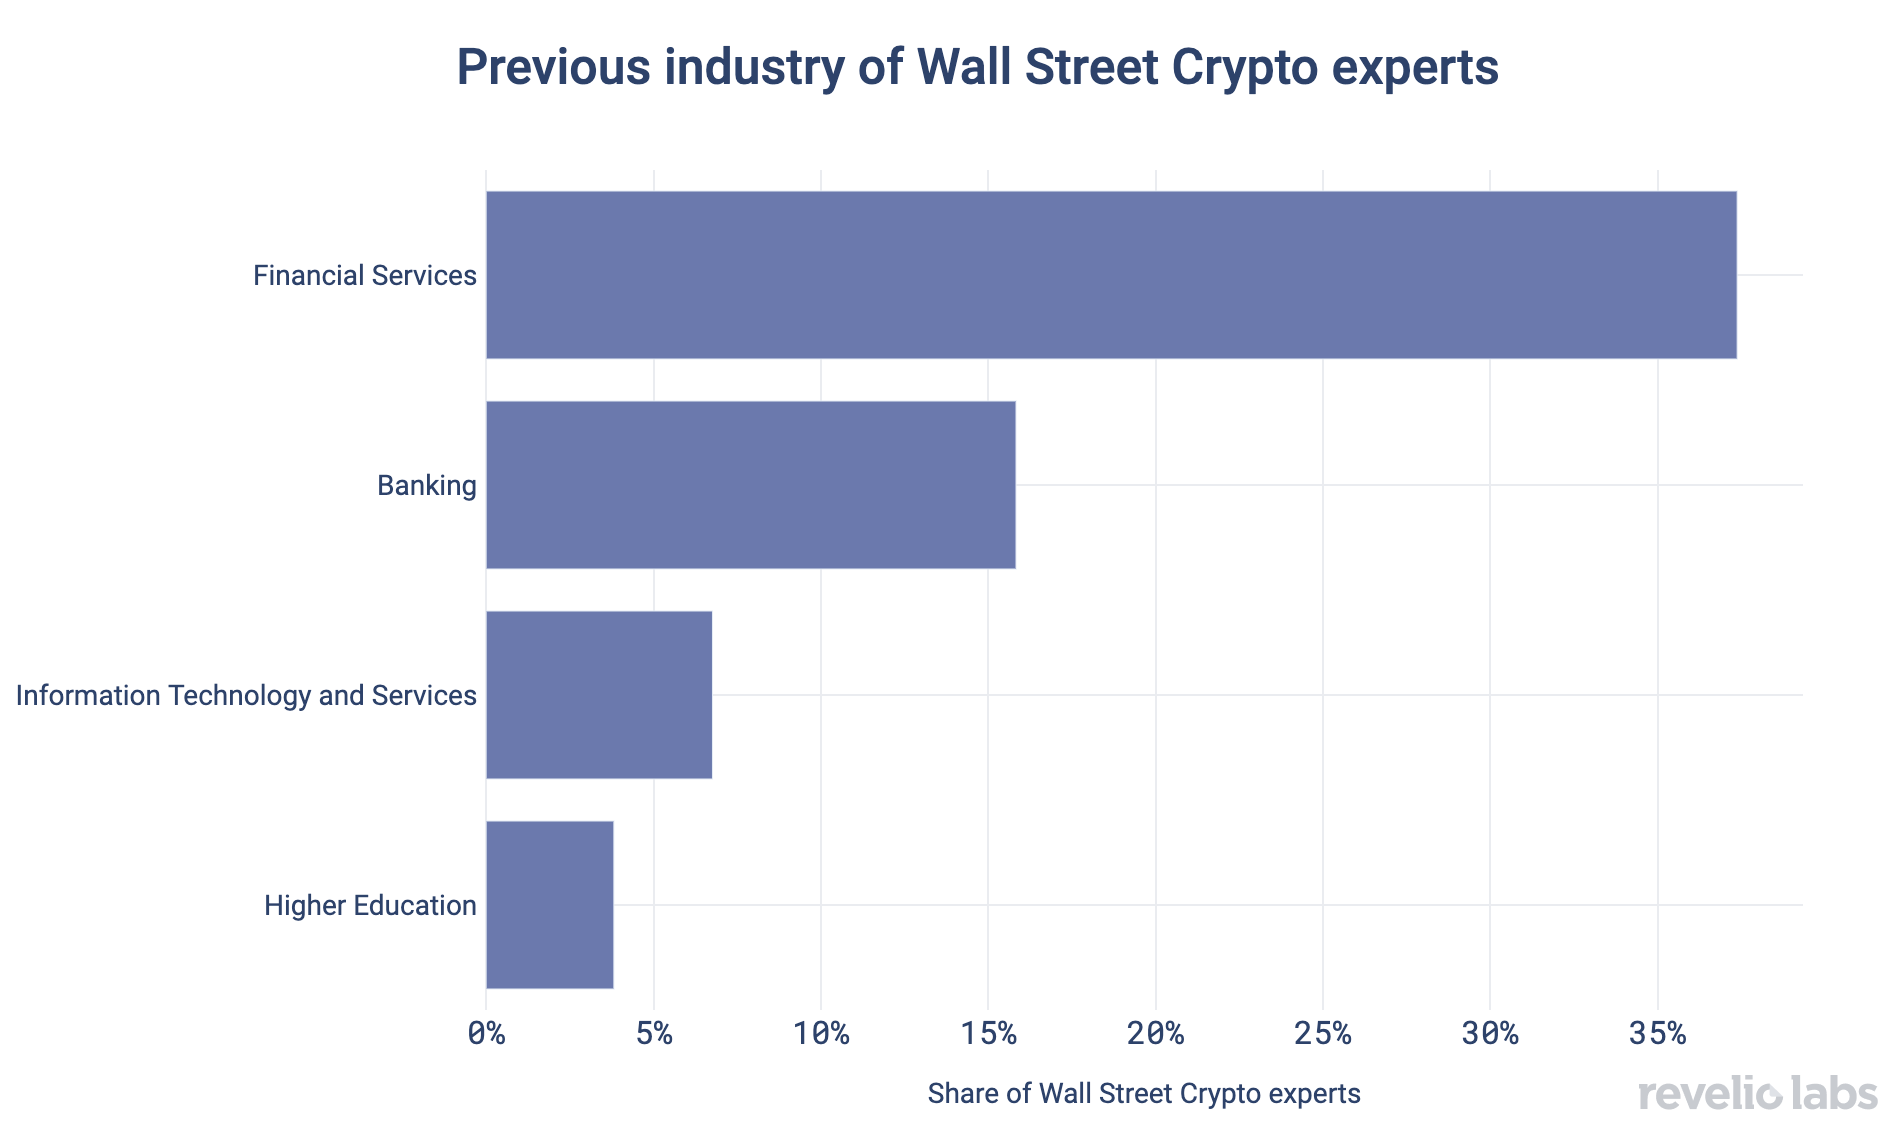 Previous industry of Wall Street Crypto experts